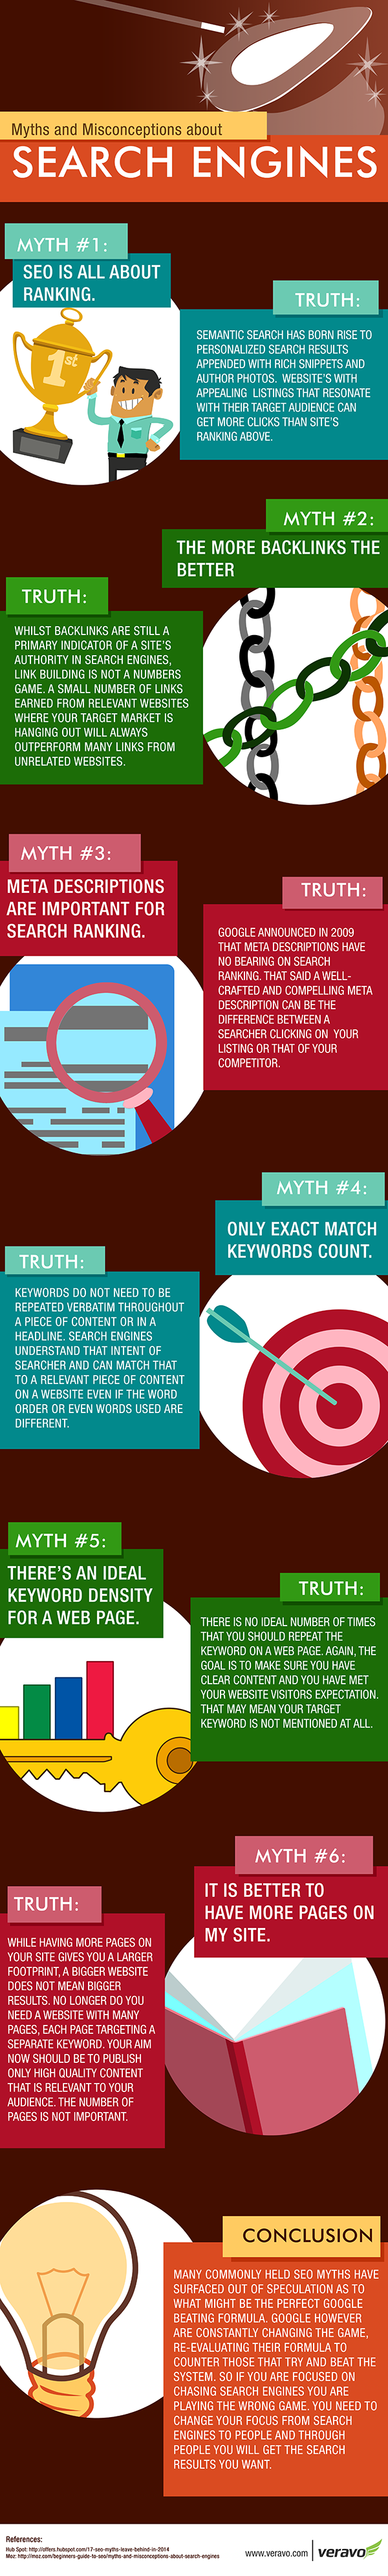 Myths and Misconceptions About Search Engines by Veravo